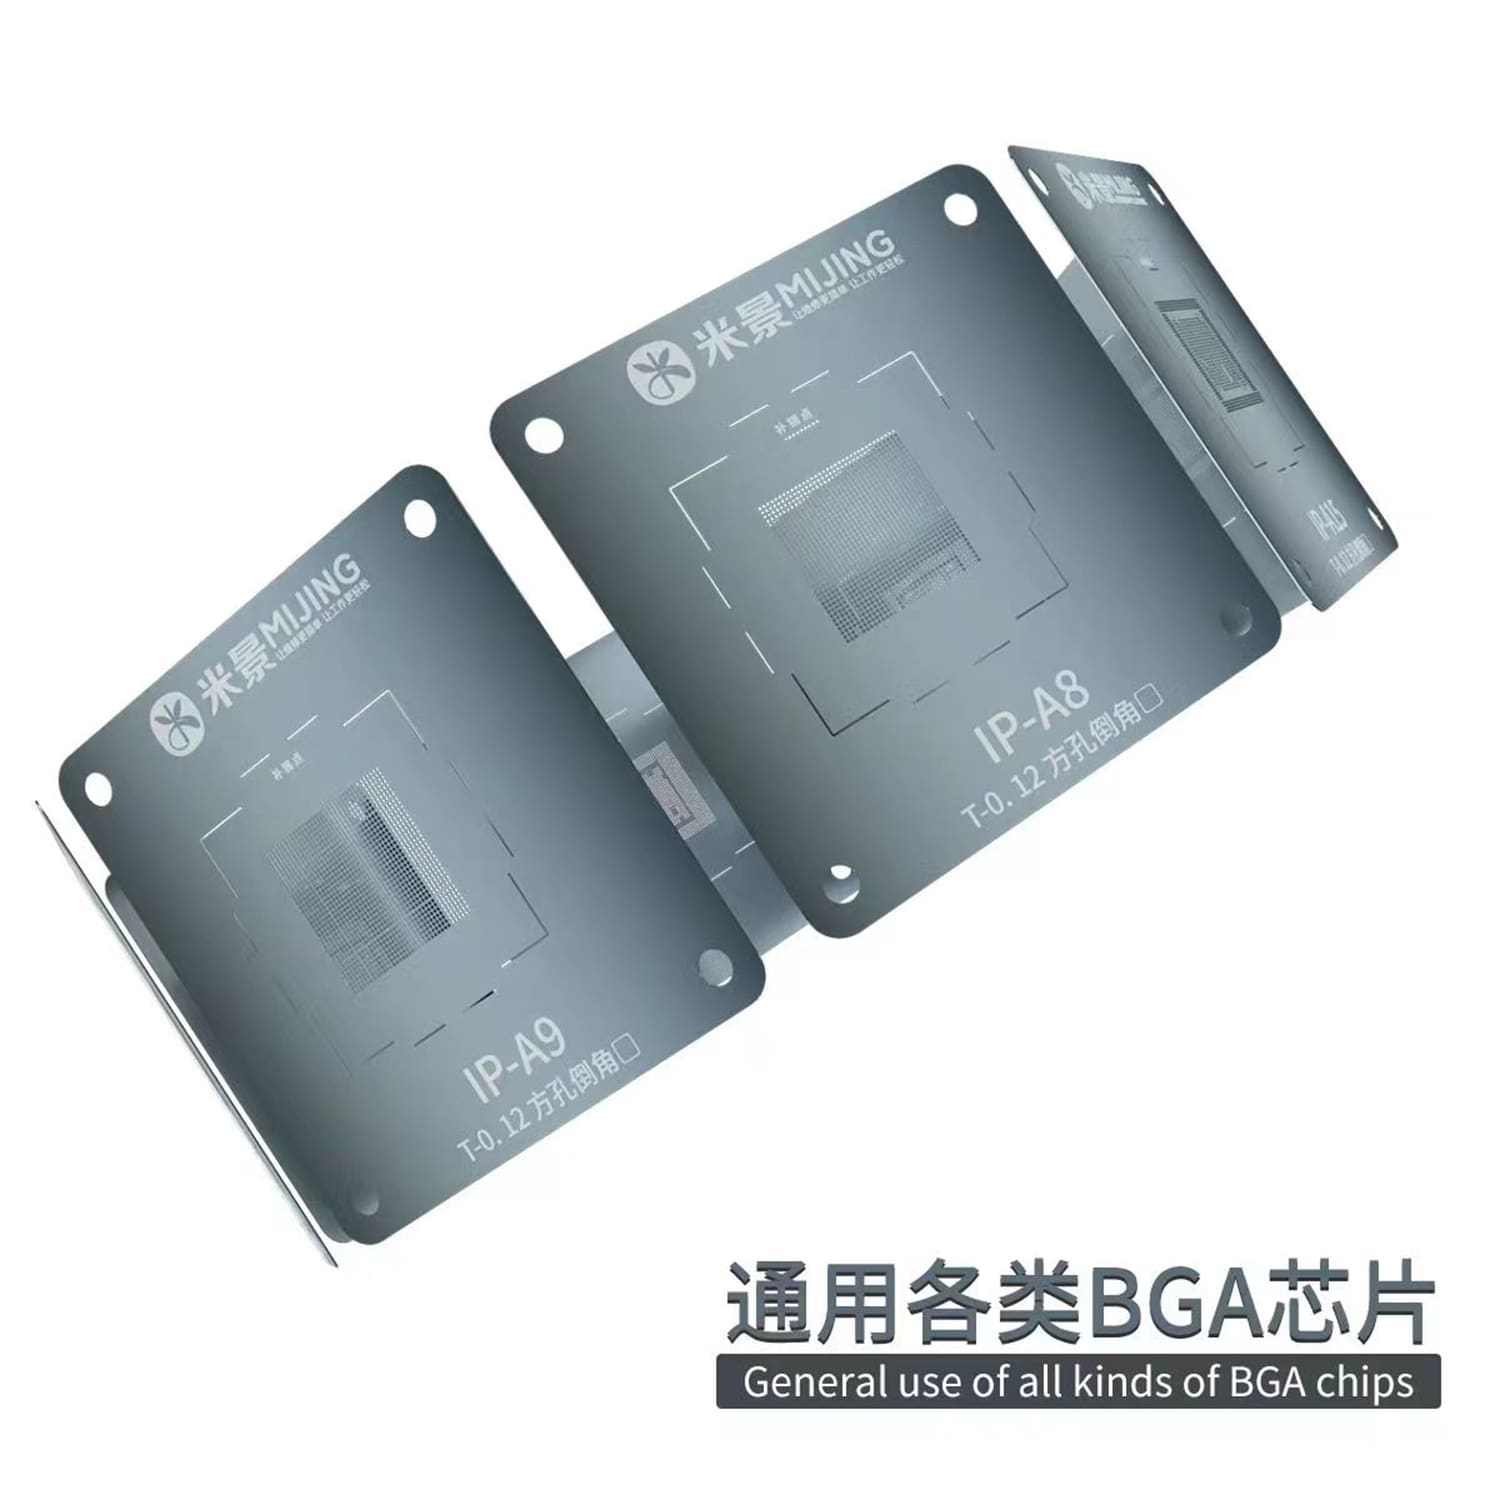 MIJING Z21 MAX CPU IC CHIP REBALLING STENCIL STATION FOR IPHONE ANDROID